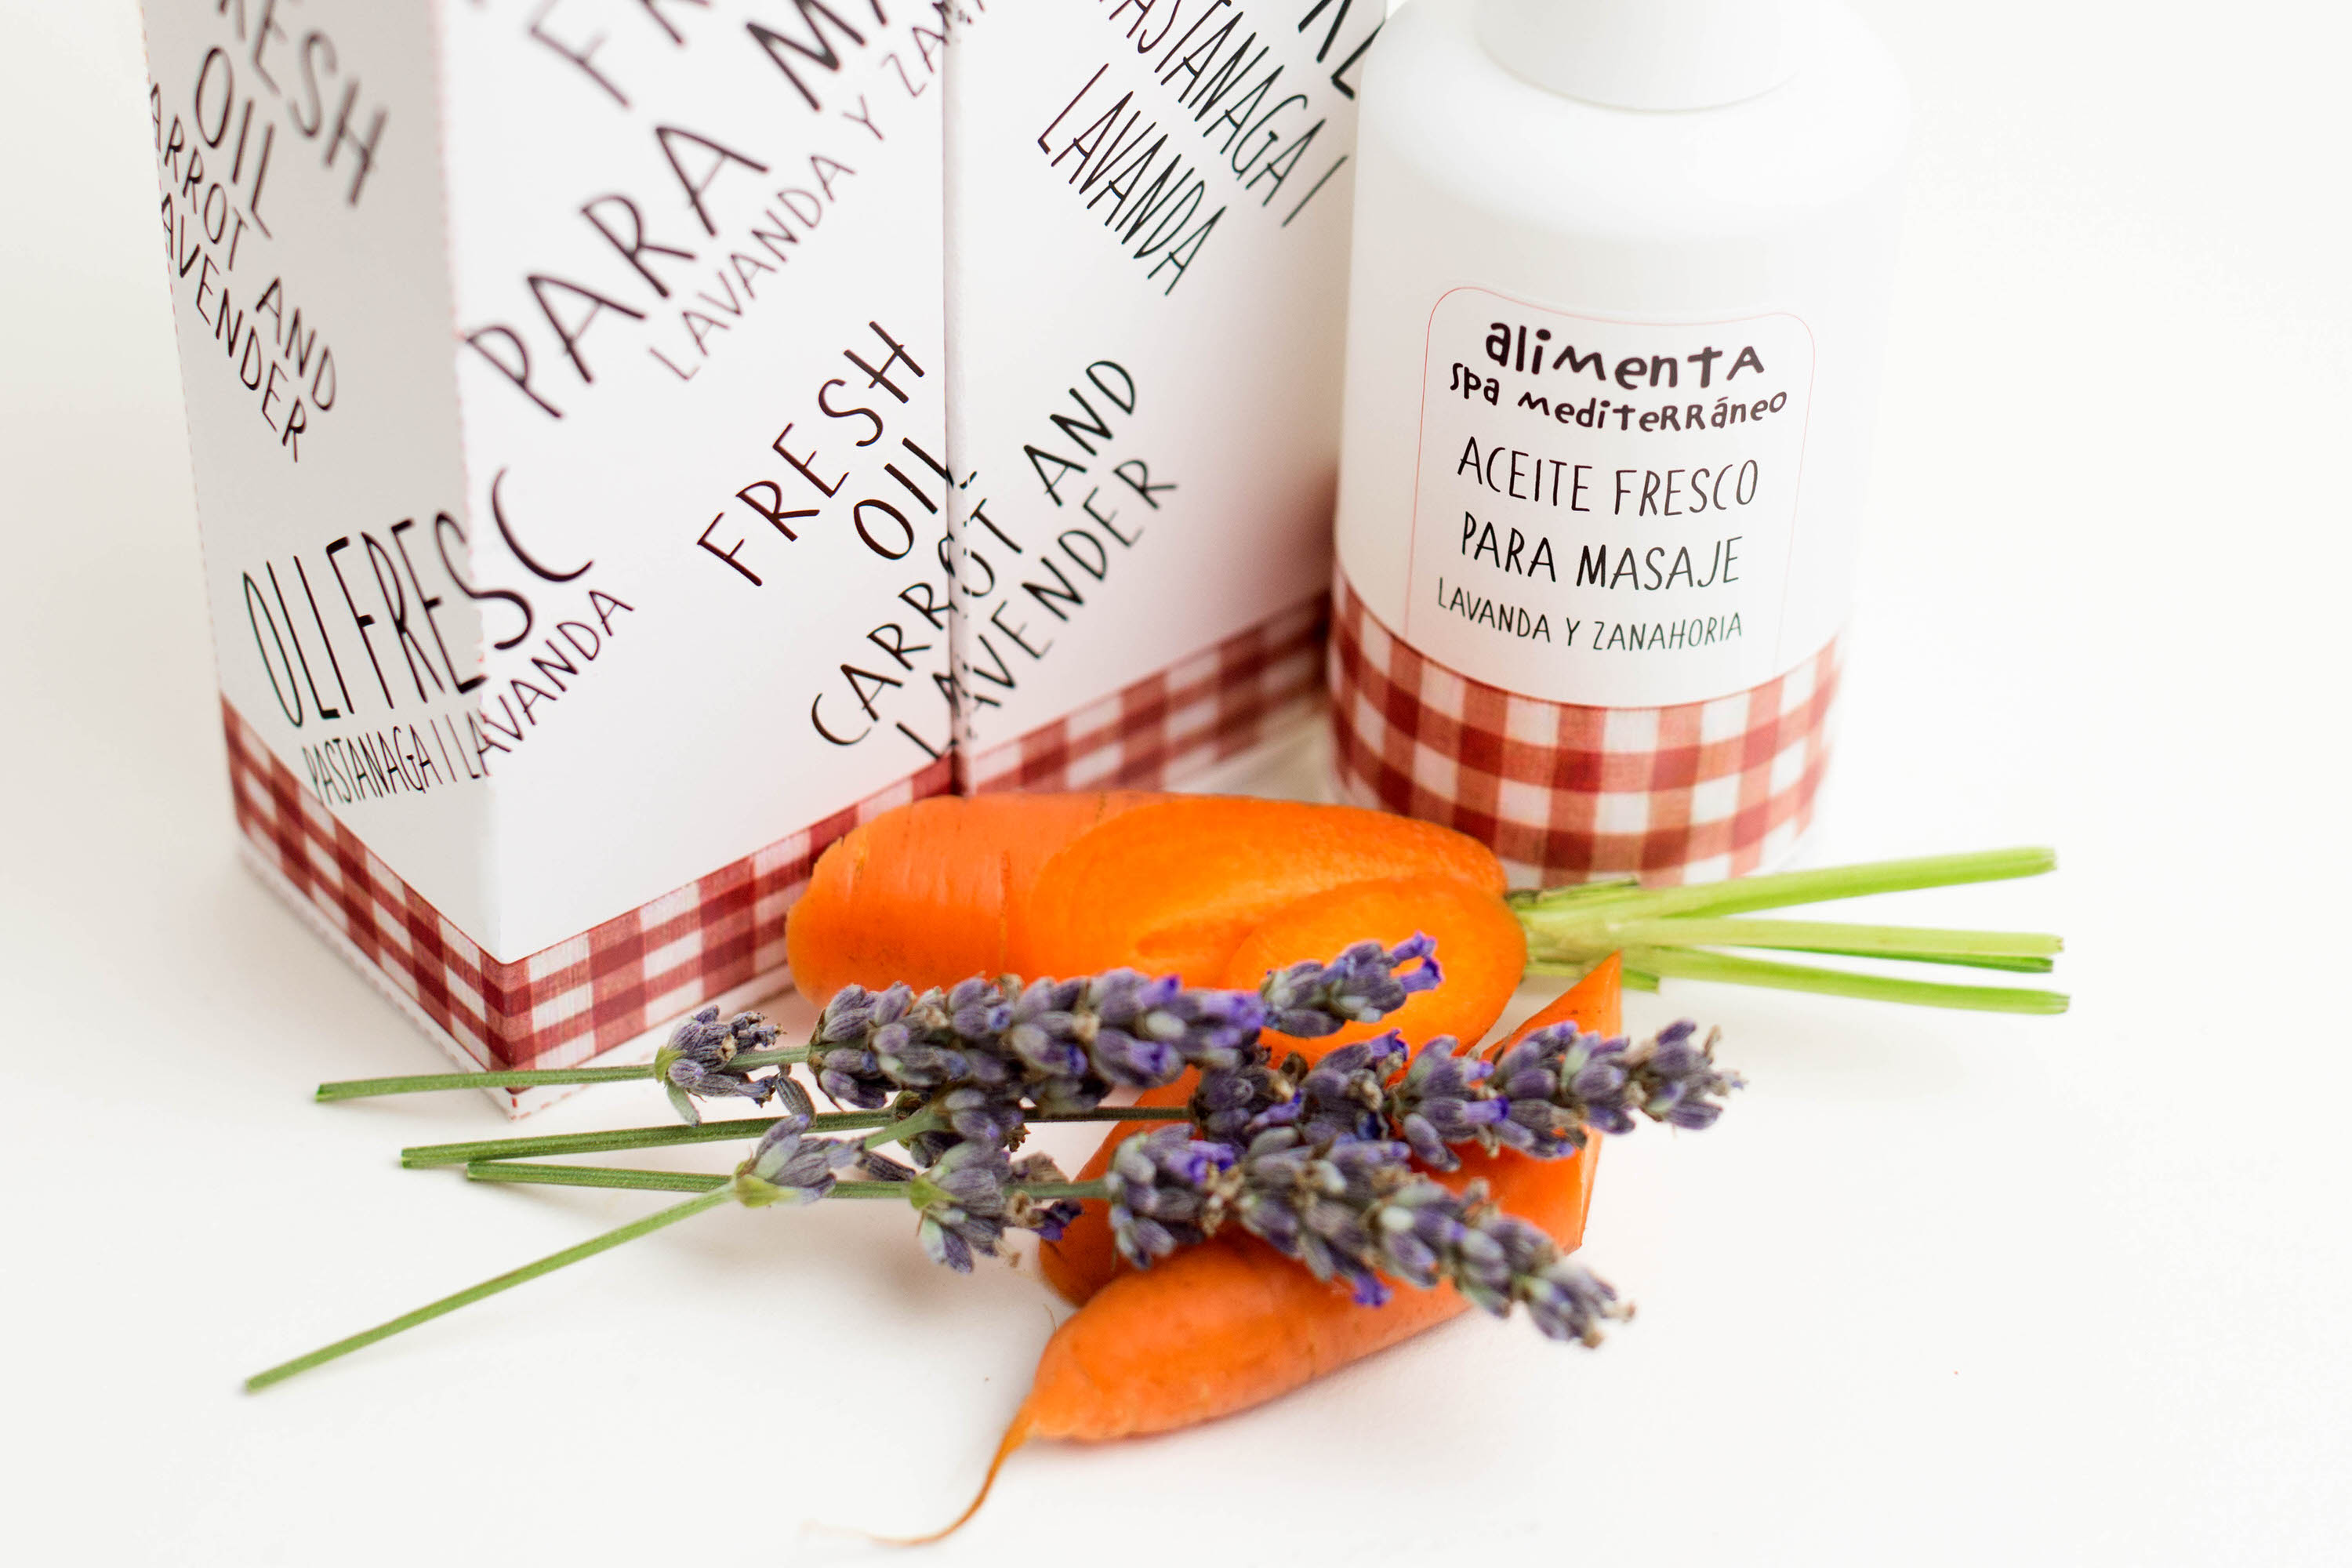 Carrot and lavender oil